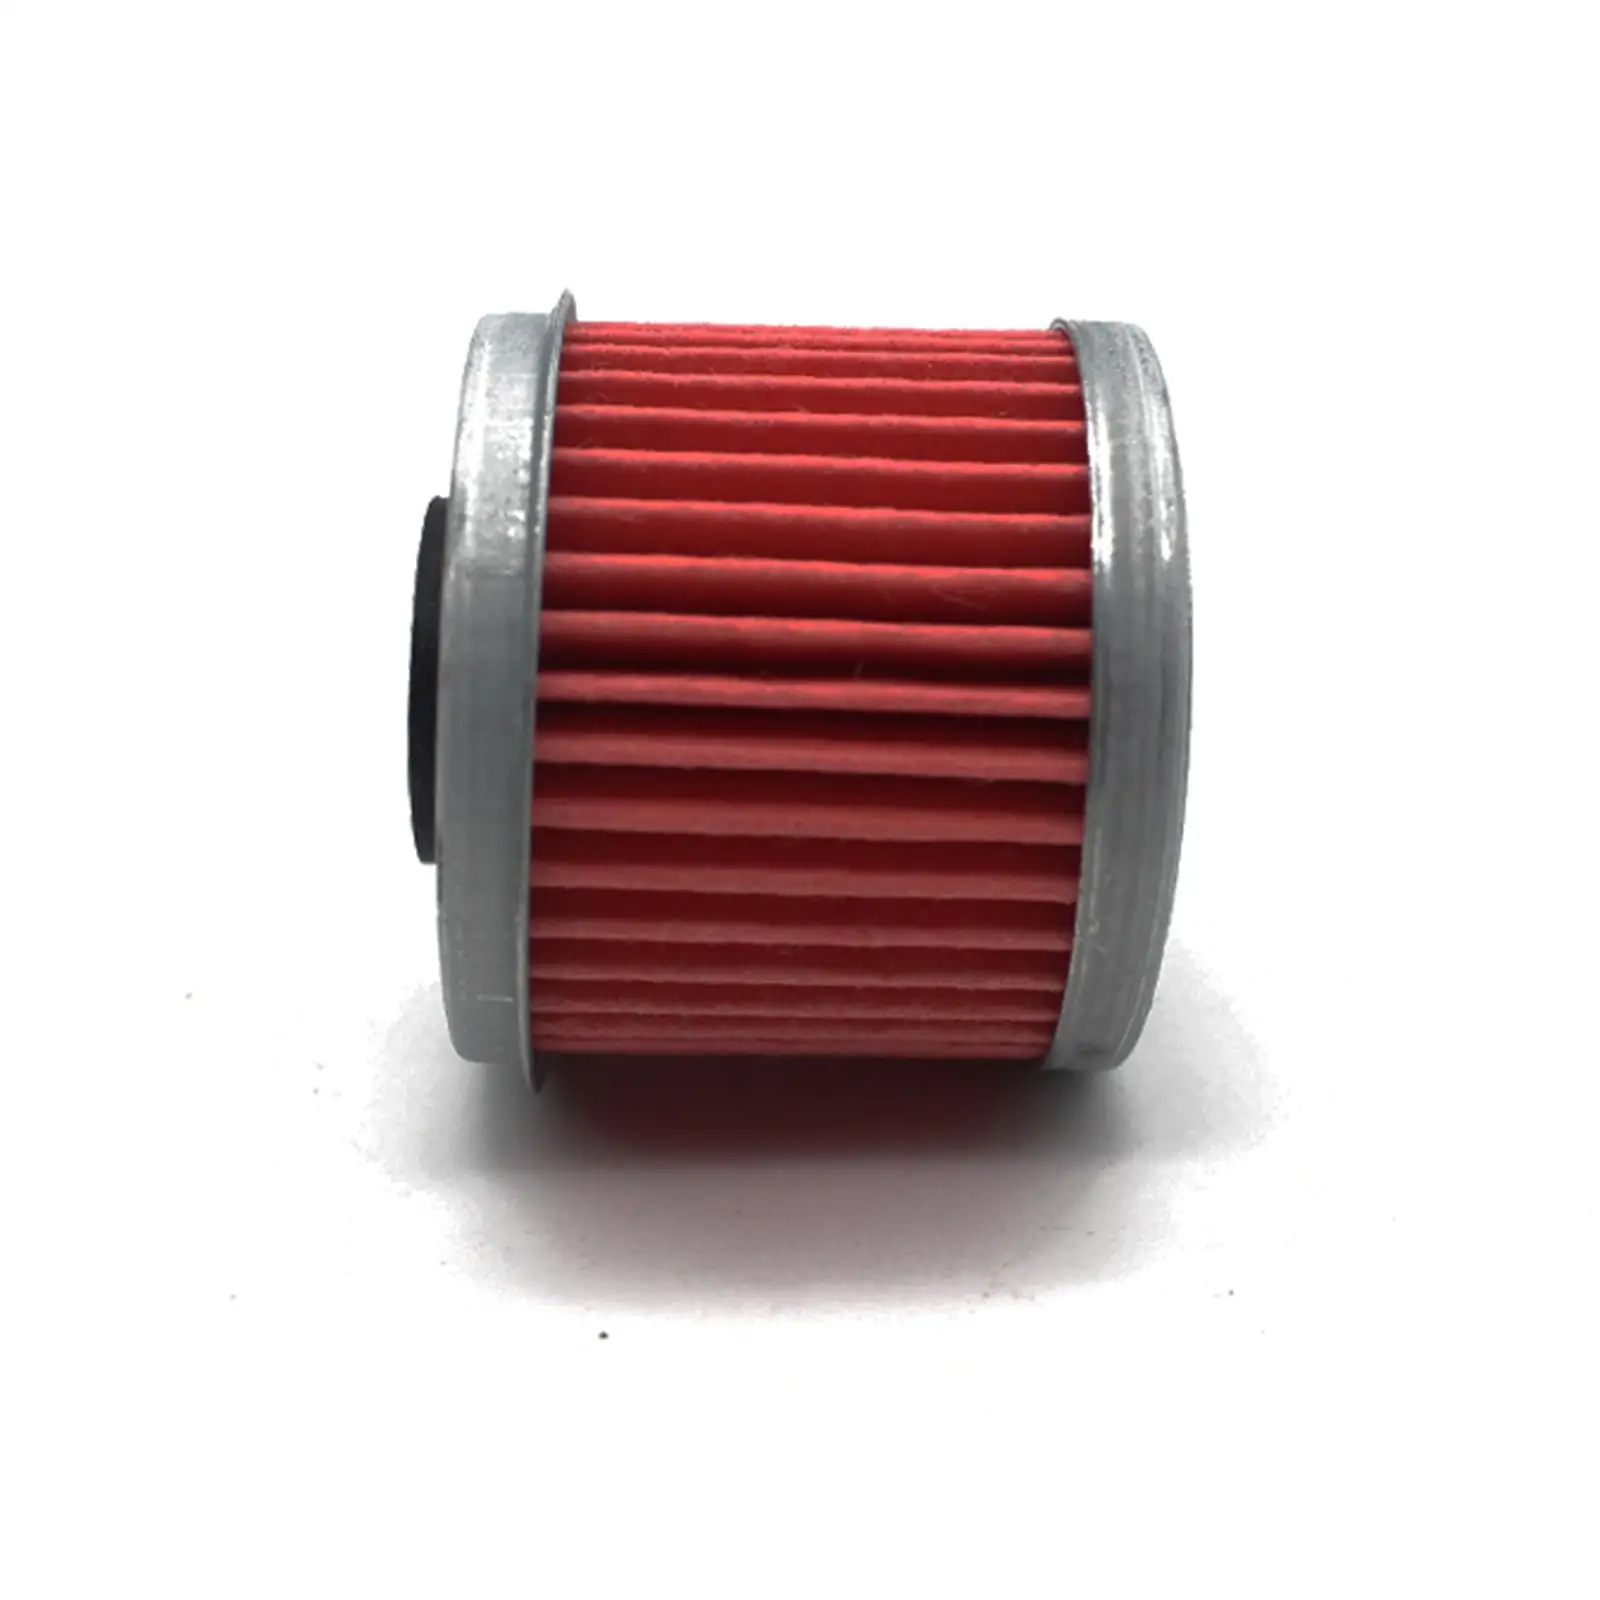 Oil Filter, Fit for Honda SXS1000 1000 M5P 2016-2017, Replace Parts ACC Easy to Install